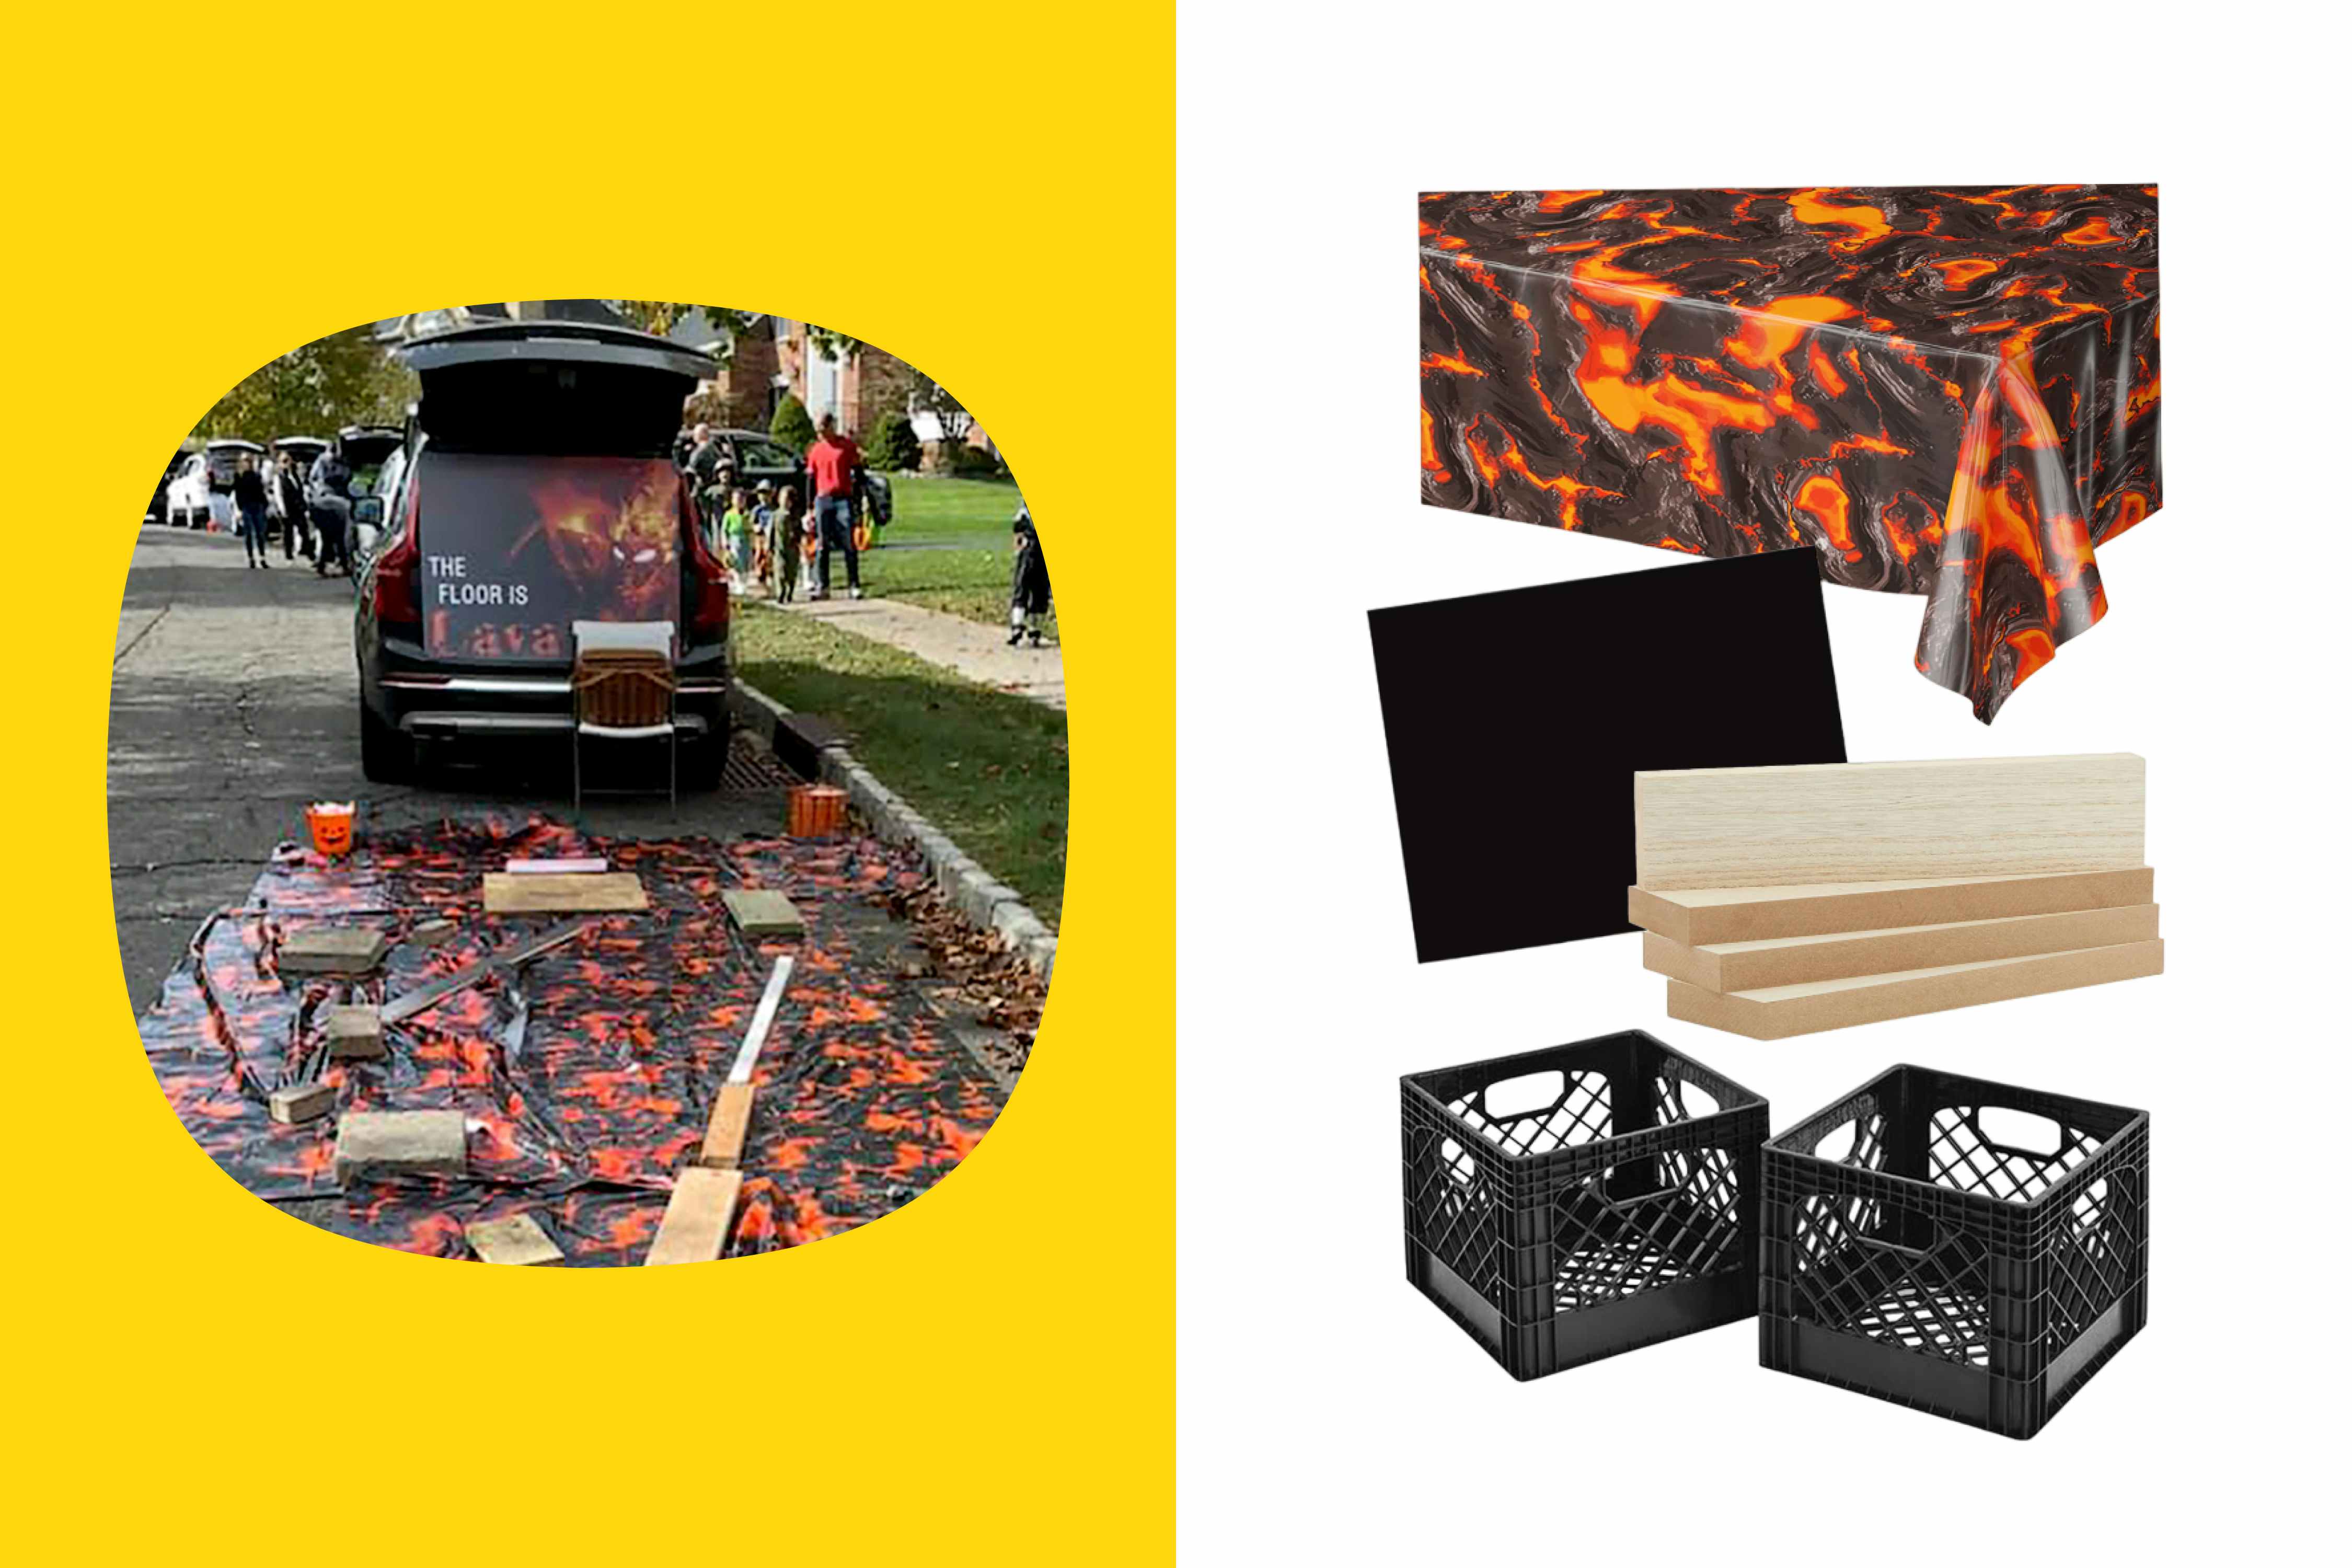 a trunk or treat idea with an Floor is Lava theme and supplies